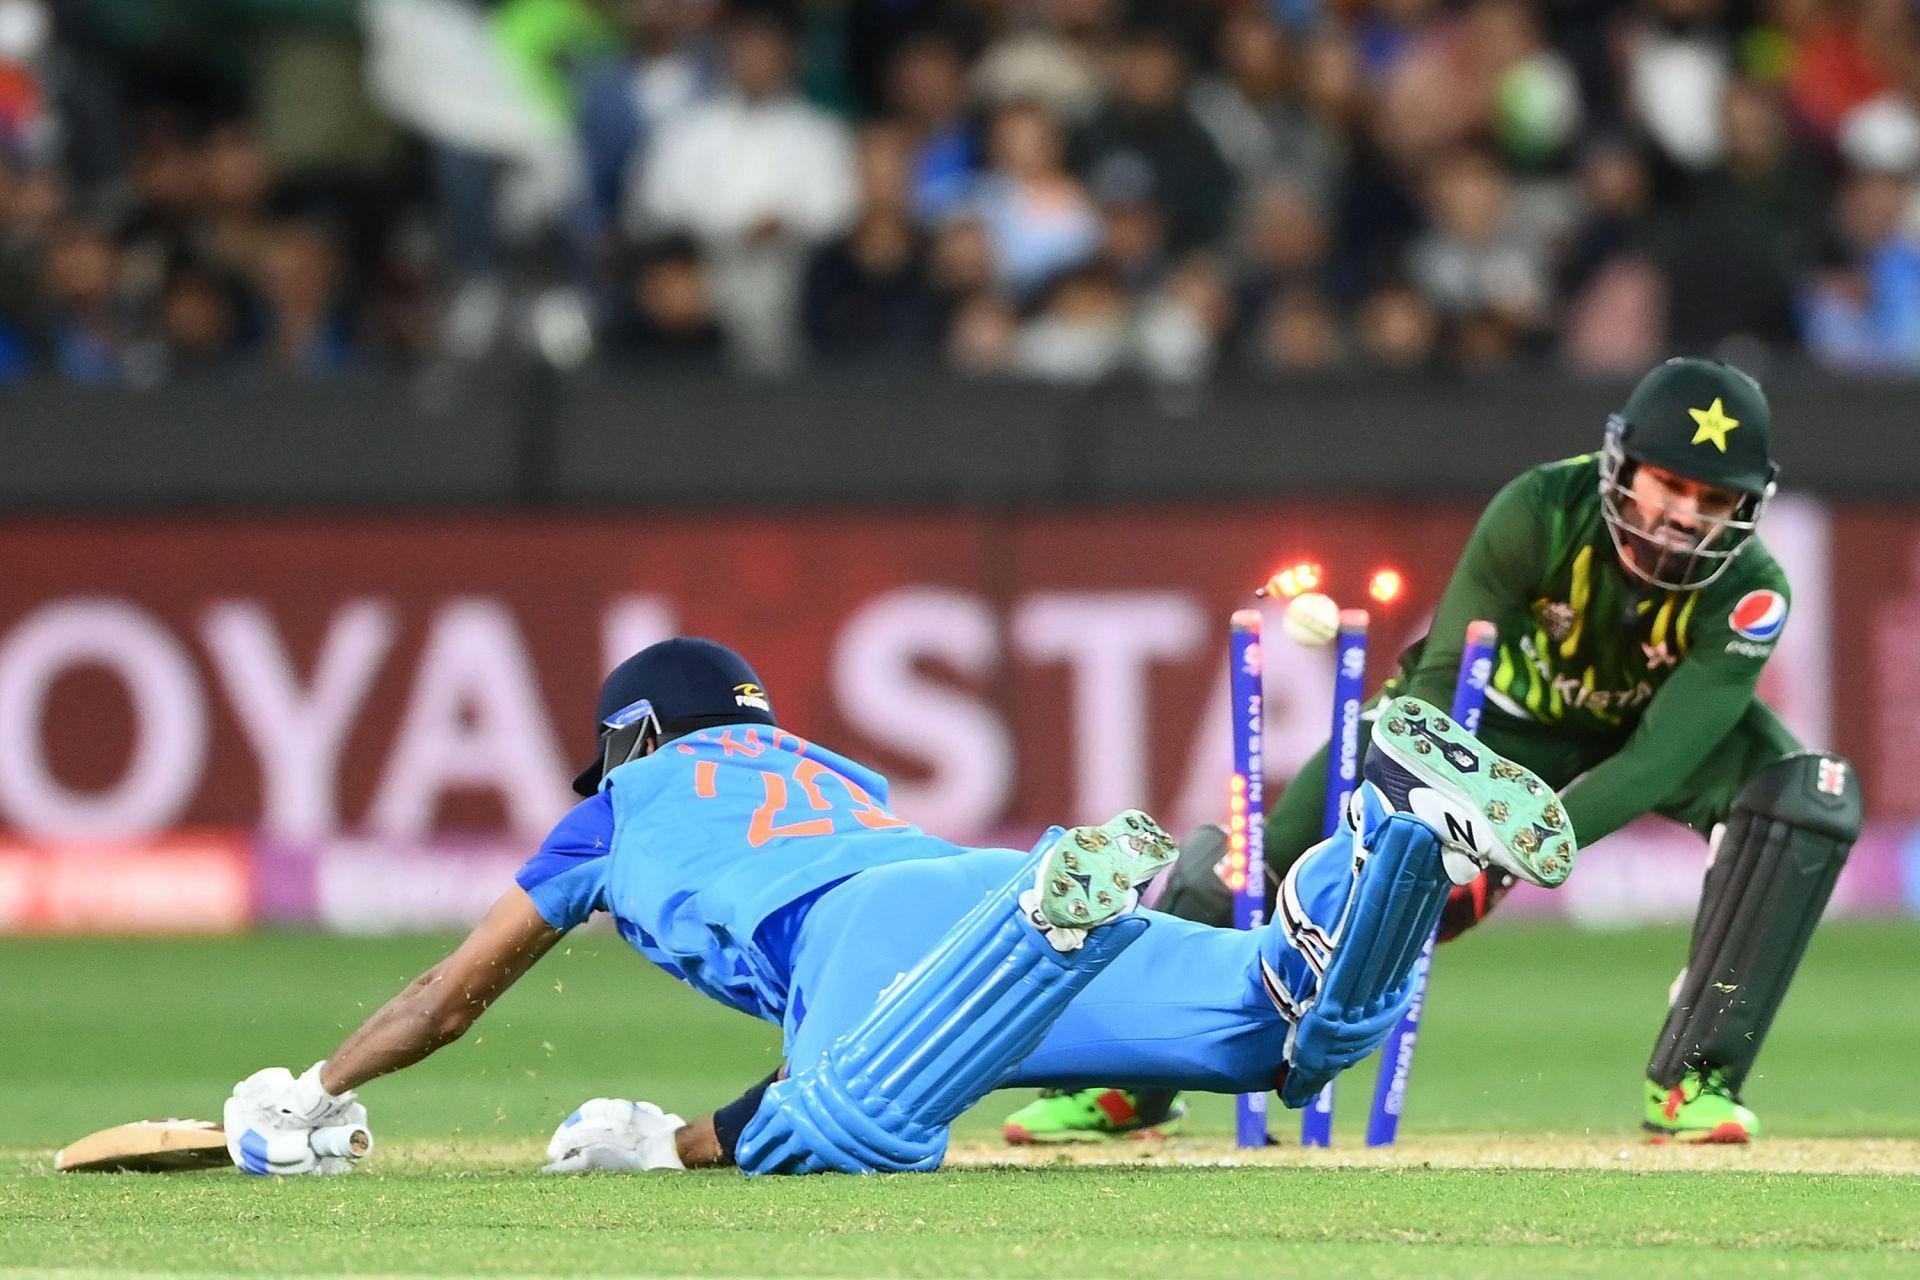 Pakistan had a nerve-wrecking battle against India in Melbourne (Image: Getty)